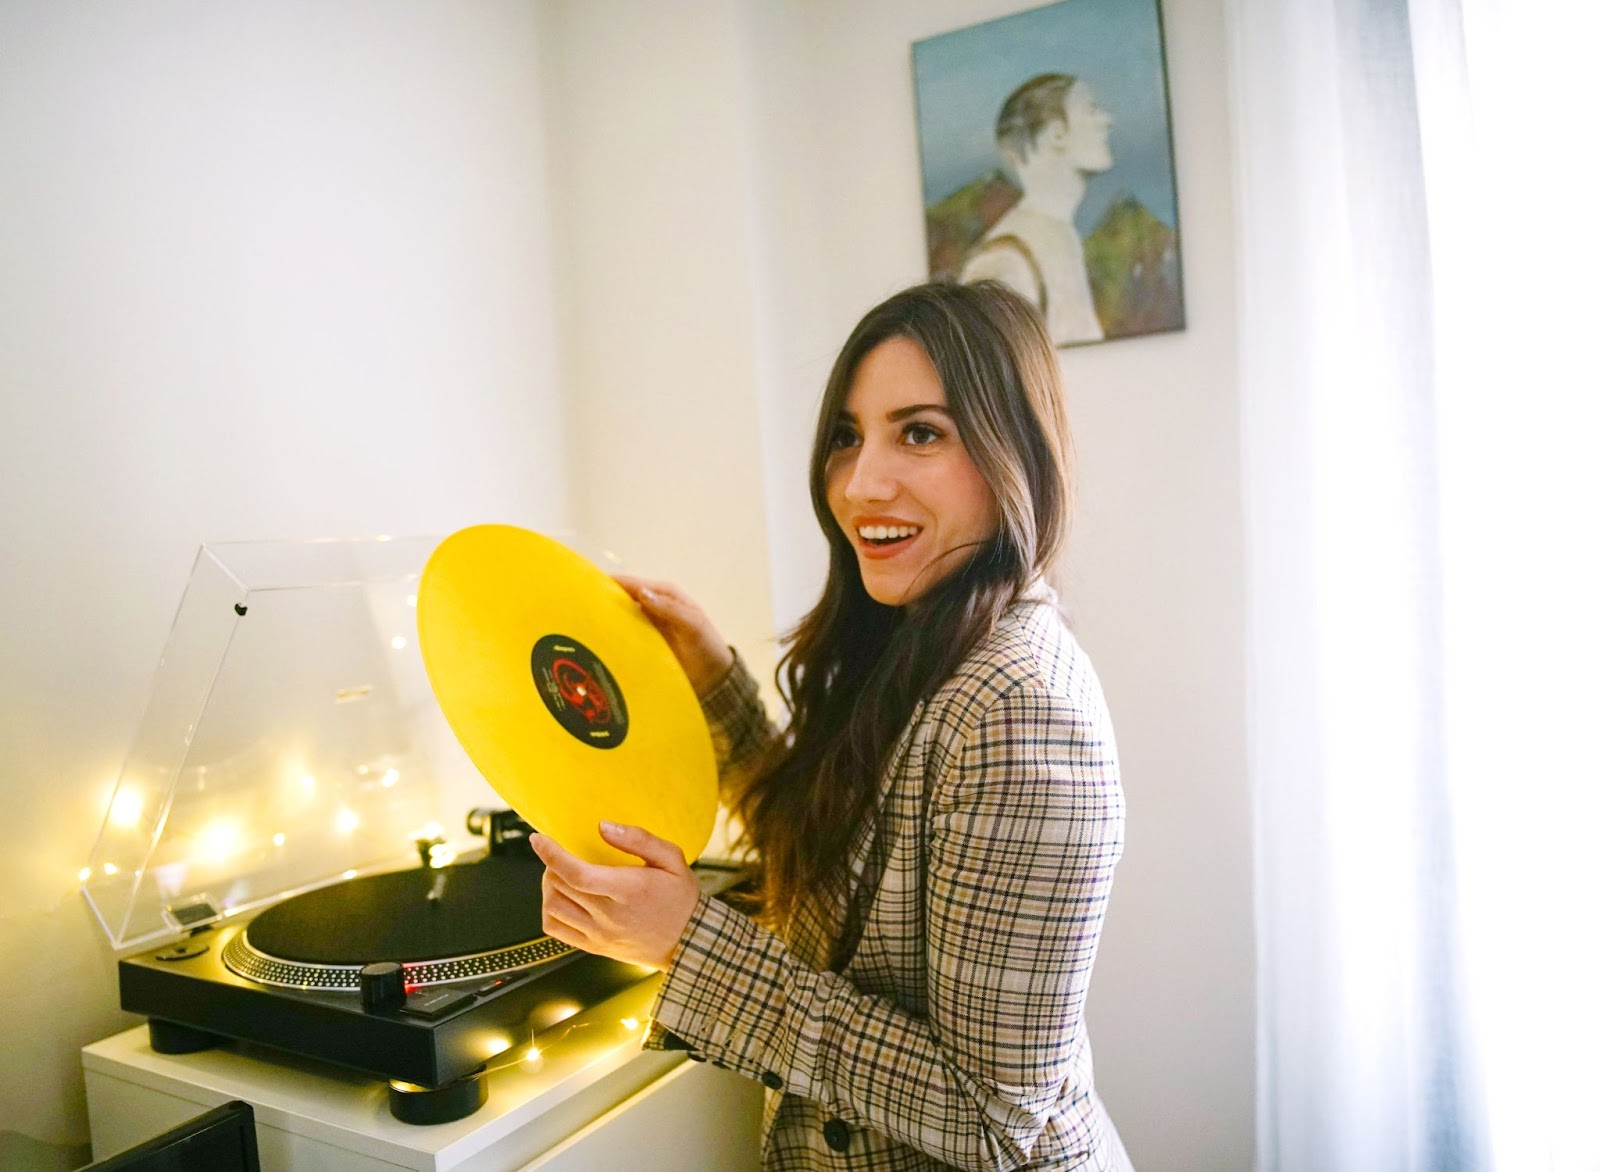 Woman holding a yellow vinyl record: How To Get Your Music Heard By Record Labels